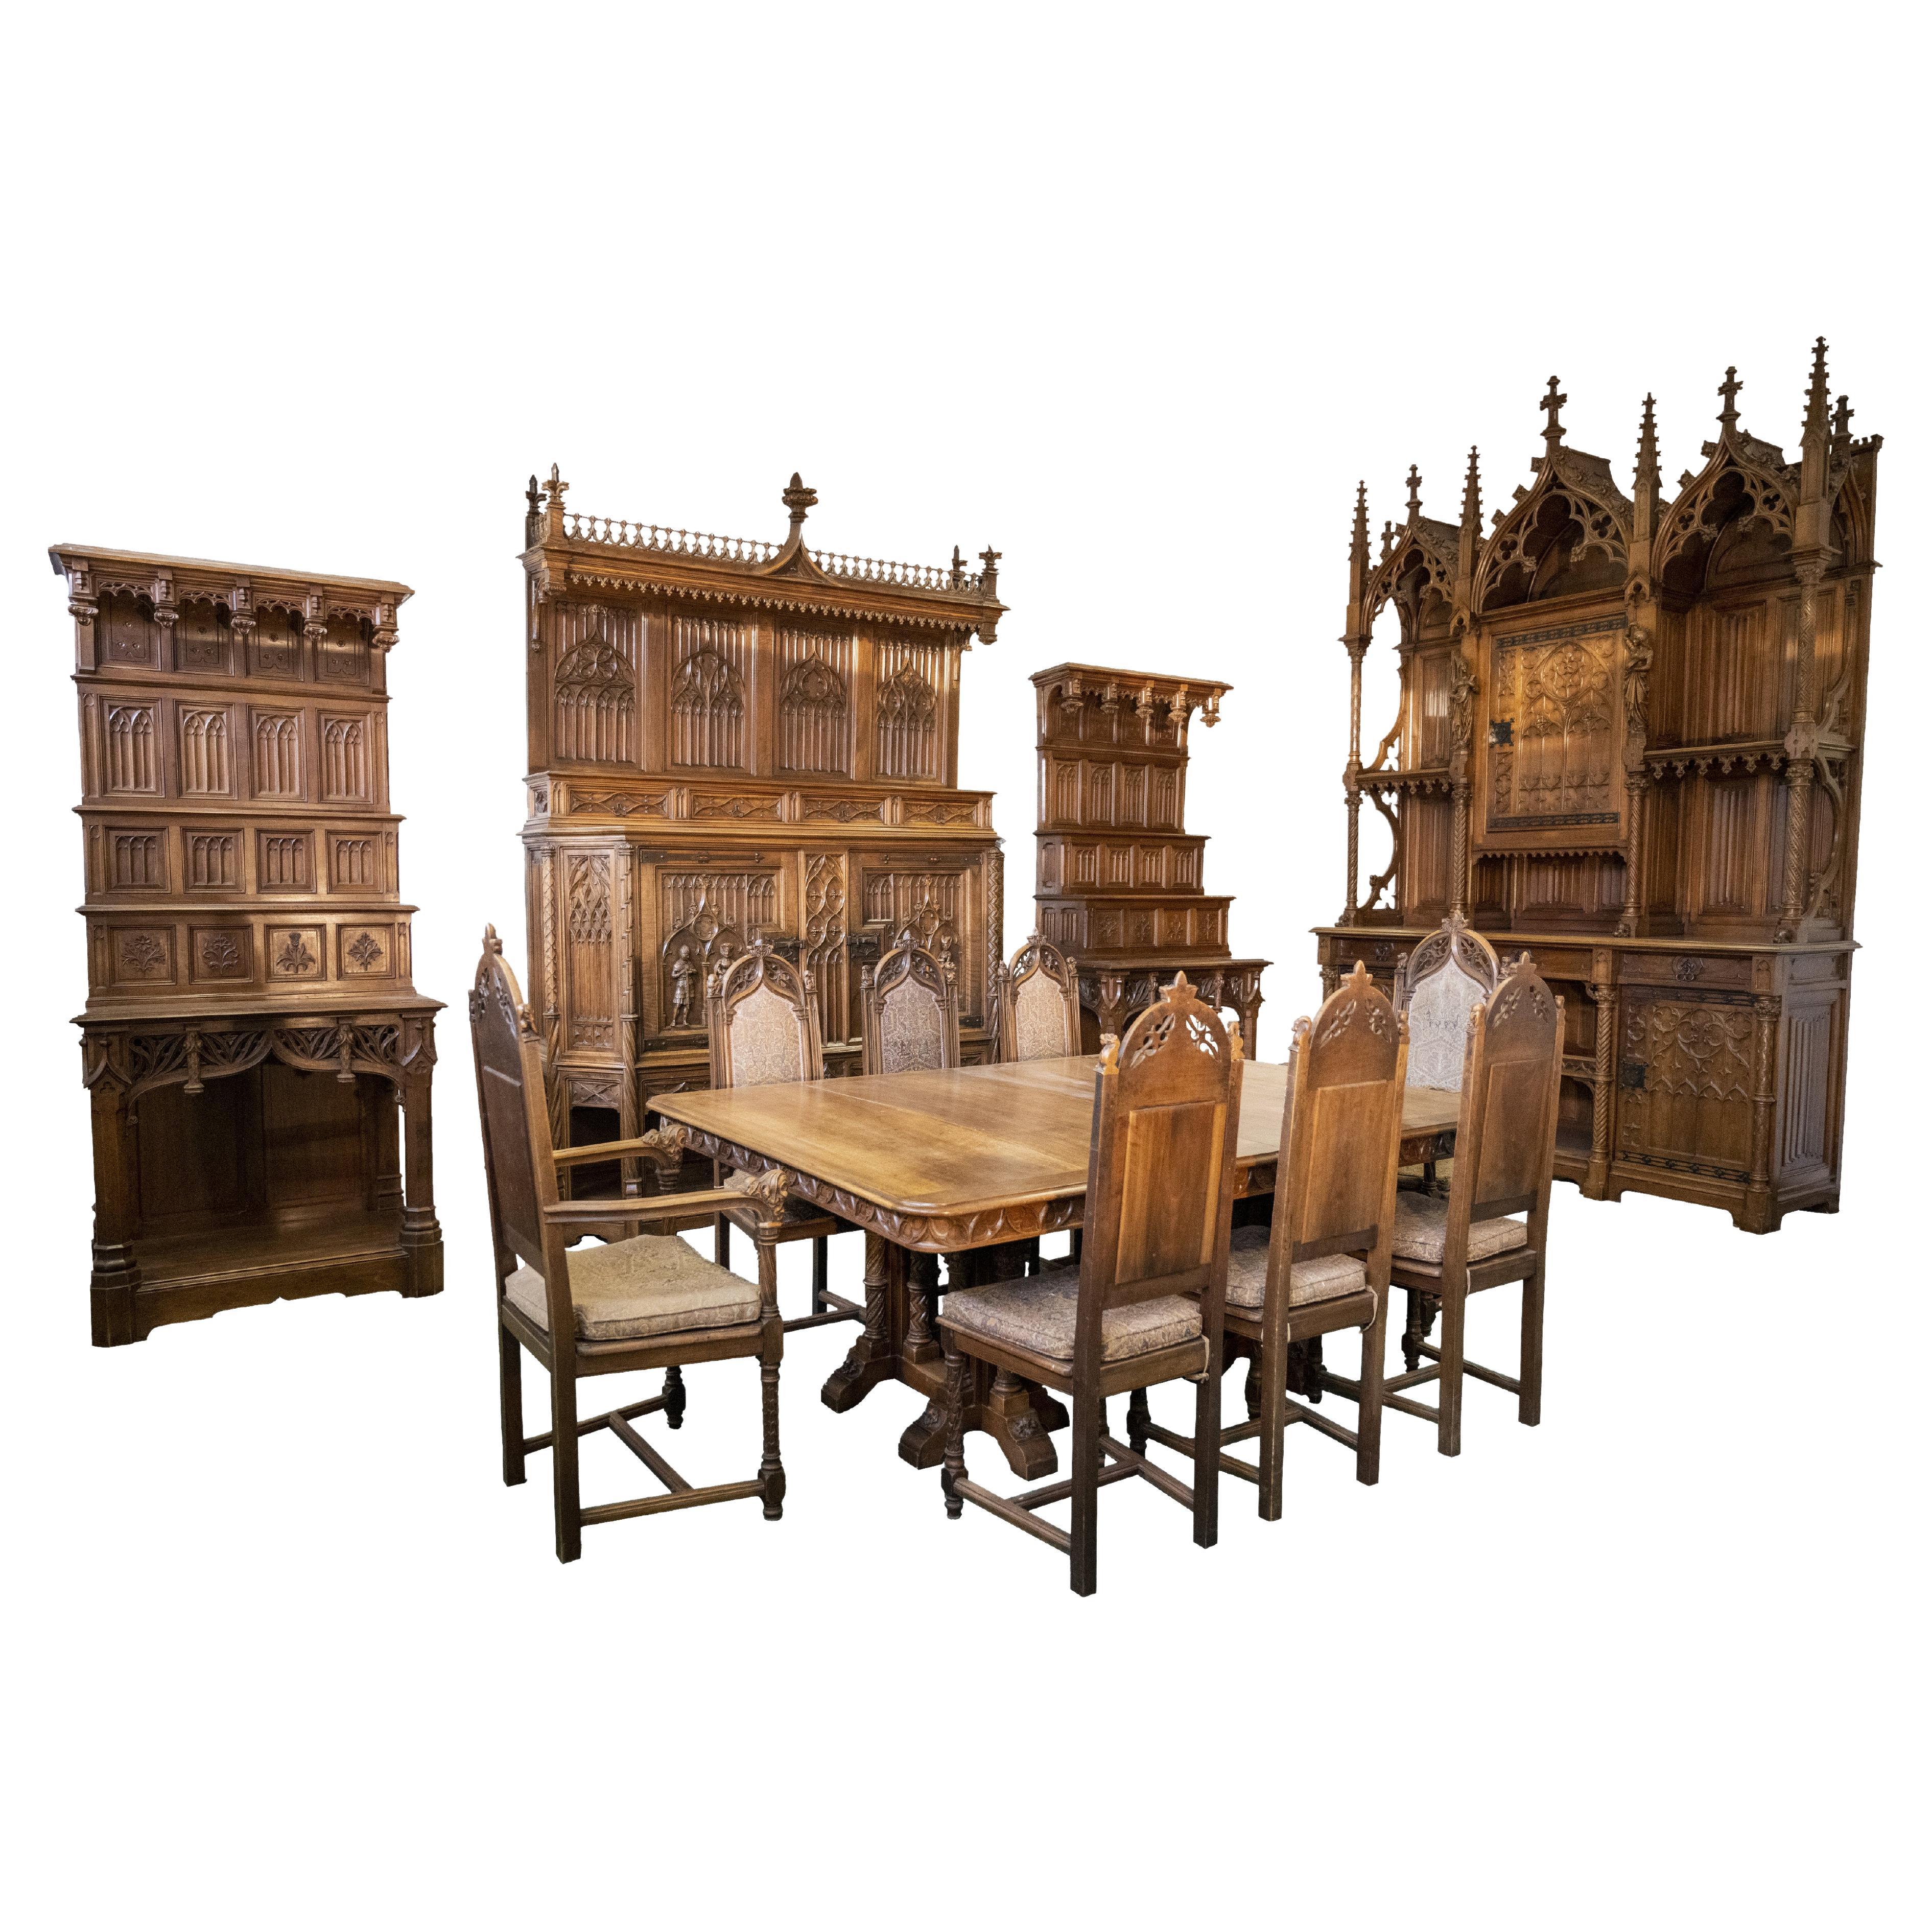 Exceptional Neo Gothic Dining Room Set For Sale